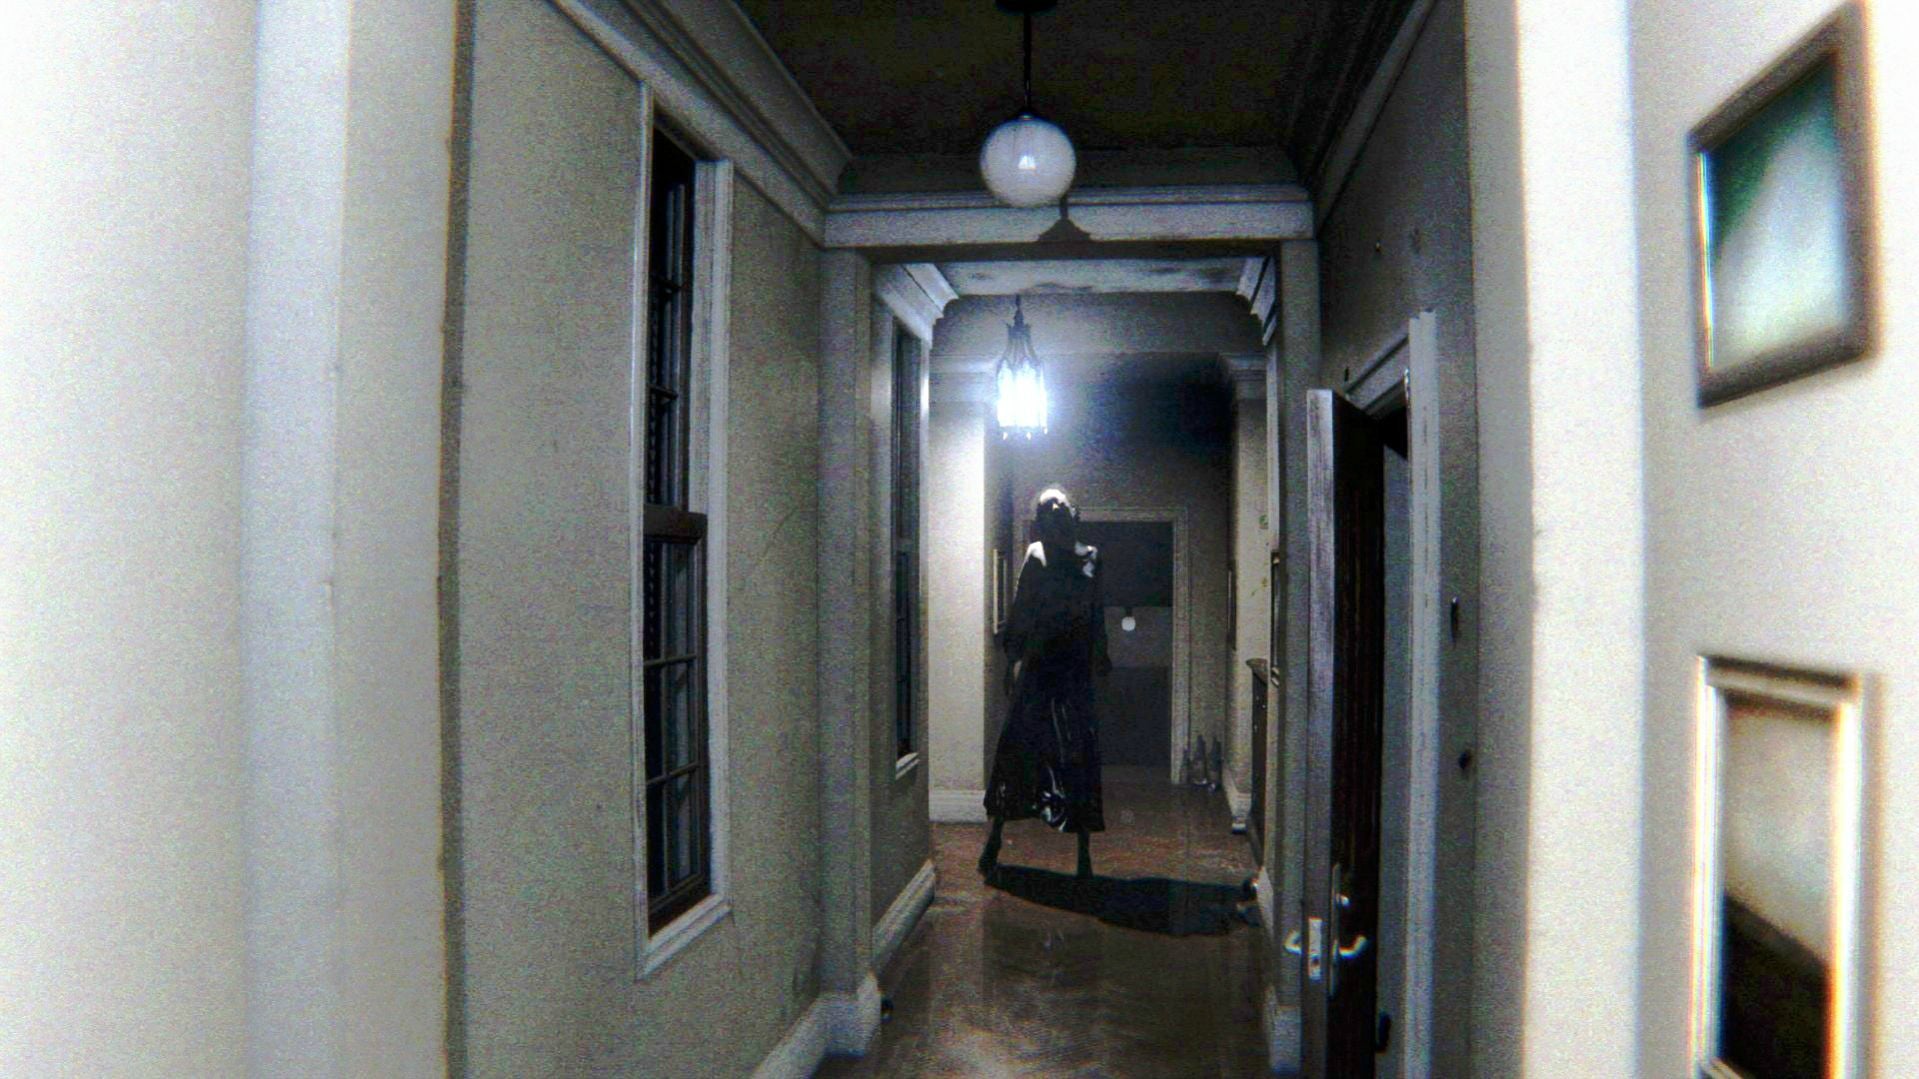 A spooky lady in a hallway in PT.